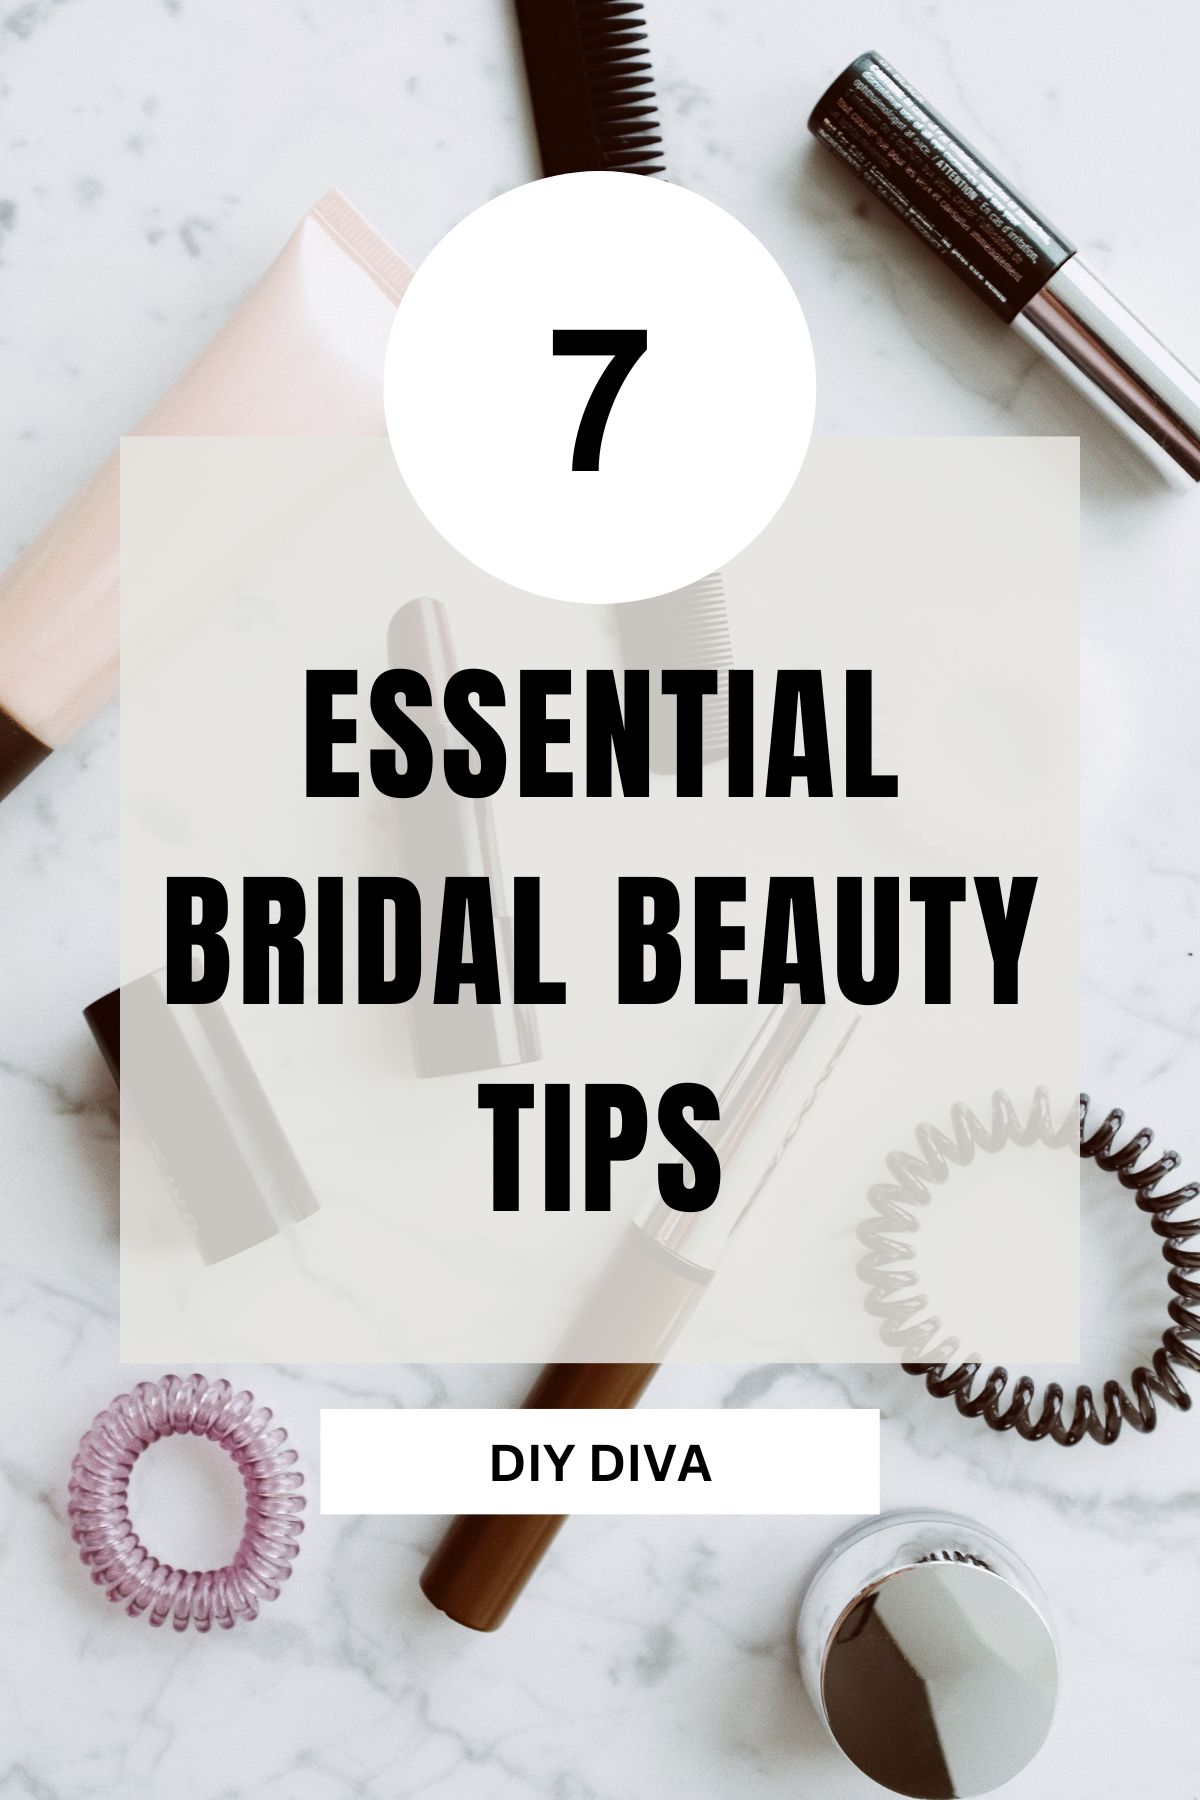 7 Essential Bridal Beauty Tips